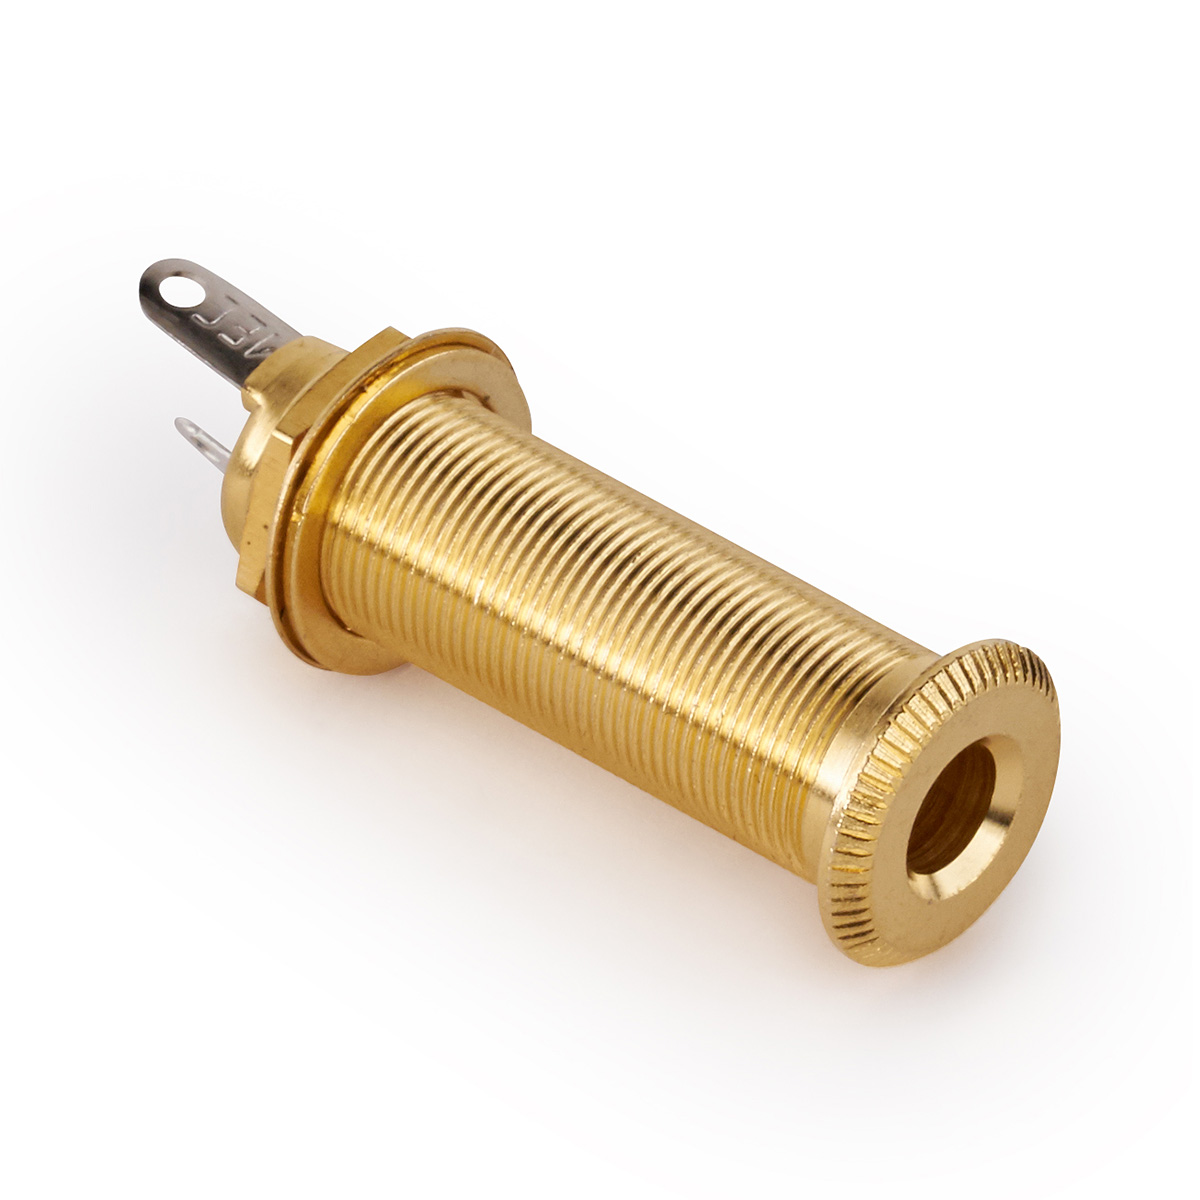 MEC Closed Stereo Jack Socket, for Mounting in Instrument Sides - Gold